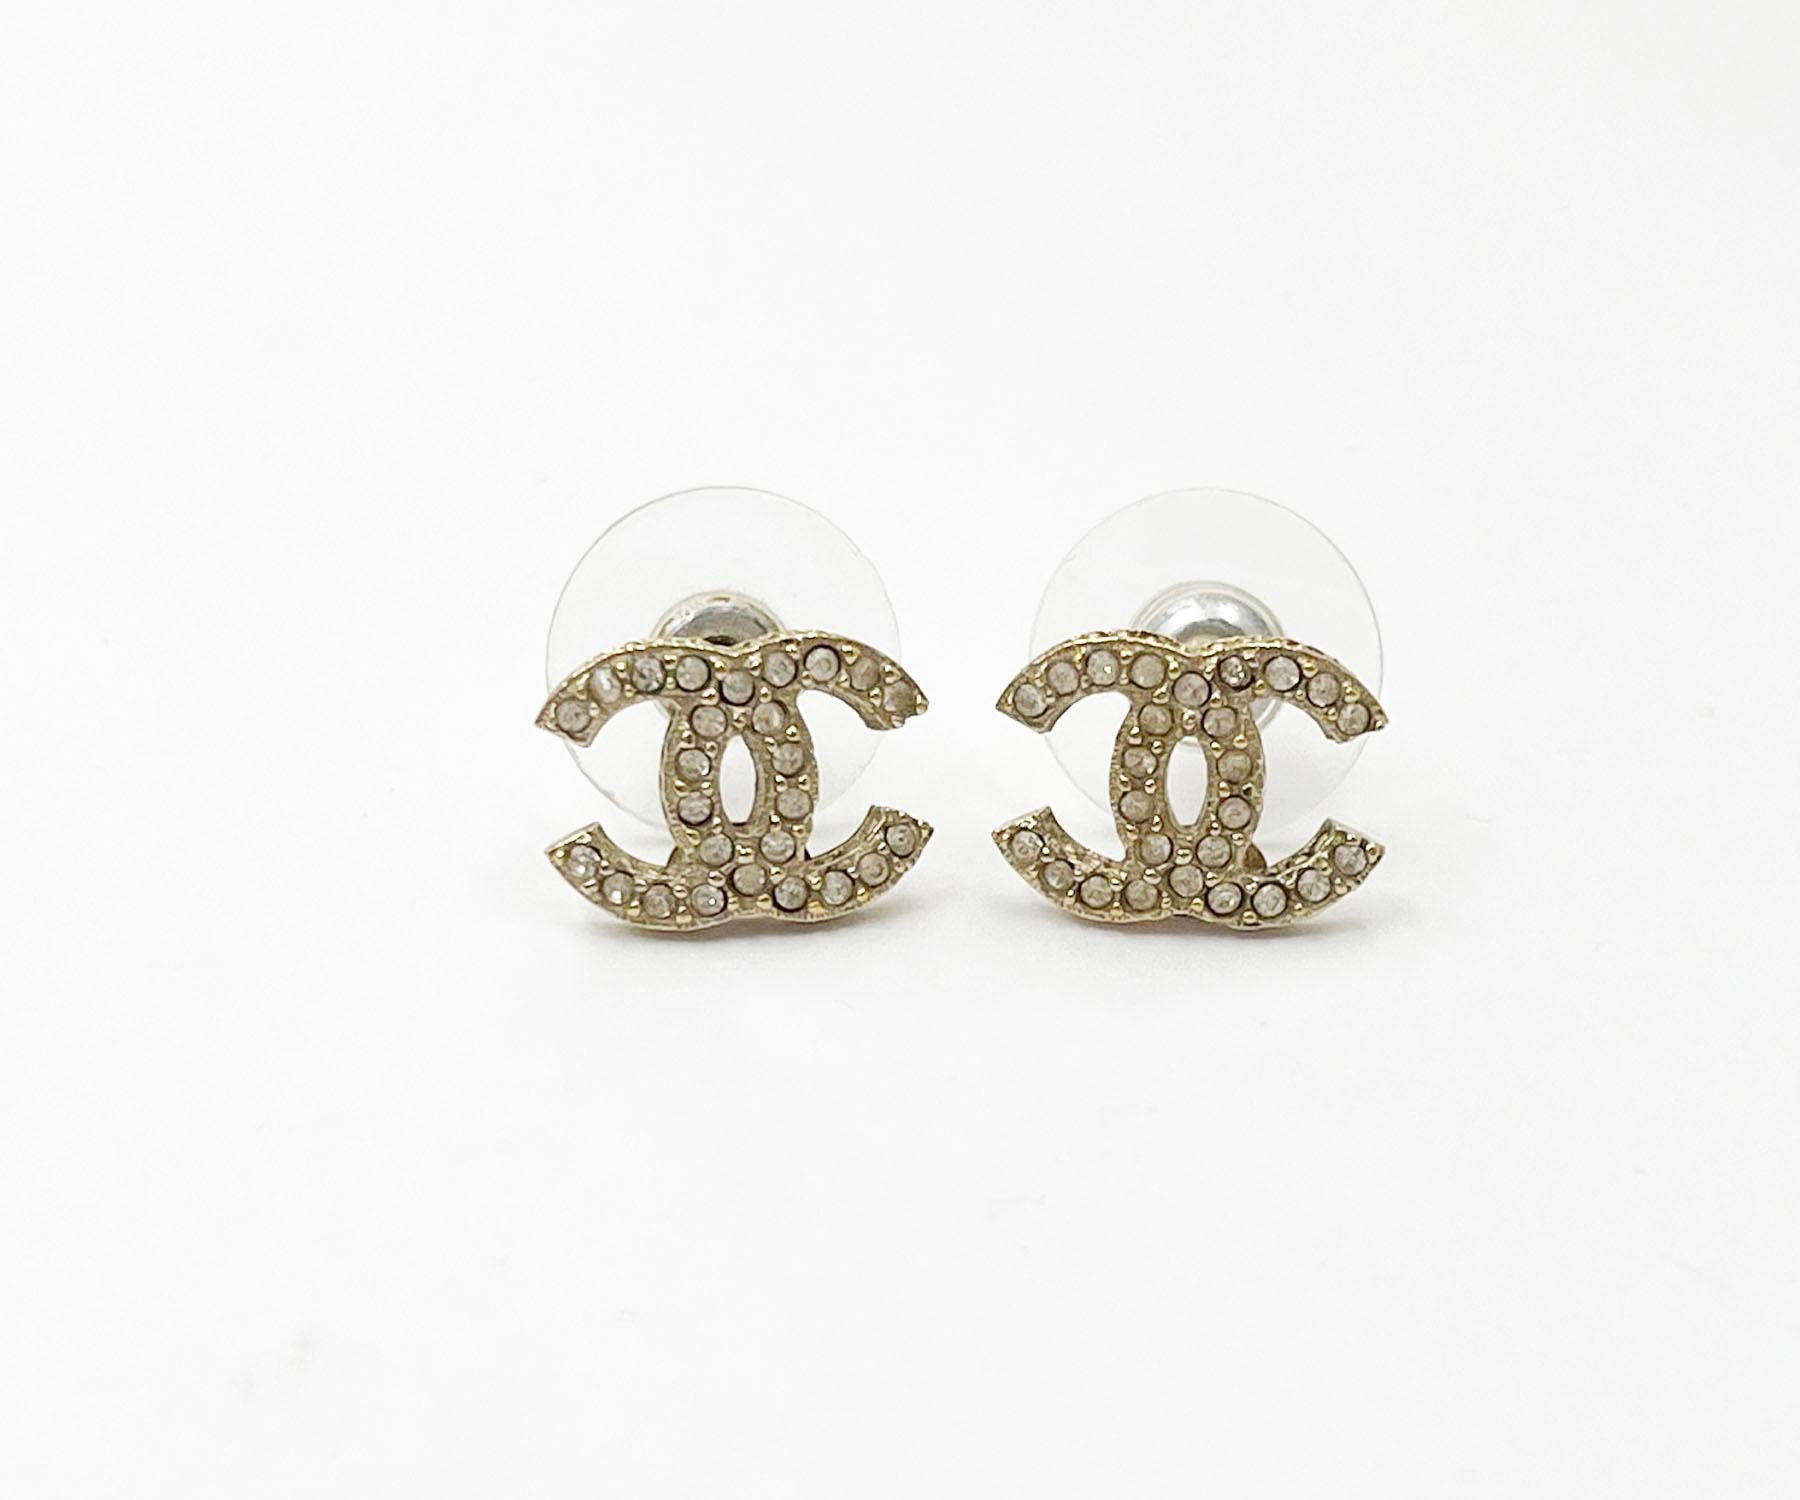 Chanel Classic Light Gold CC Crystal Small Curve Piercing Earrings

*Marked 16
*Made in Italy
*Comes with the original box

-It is approximately 0.5